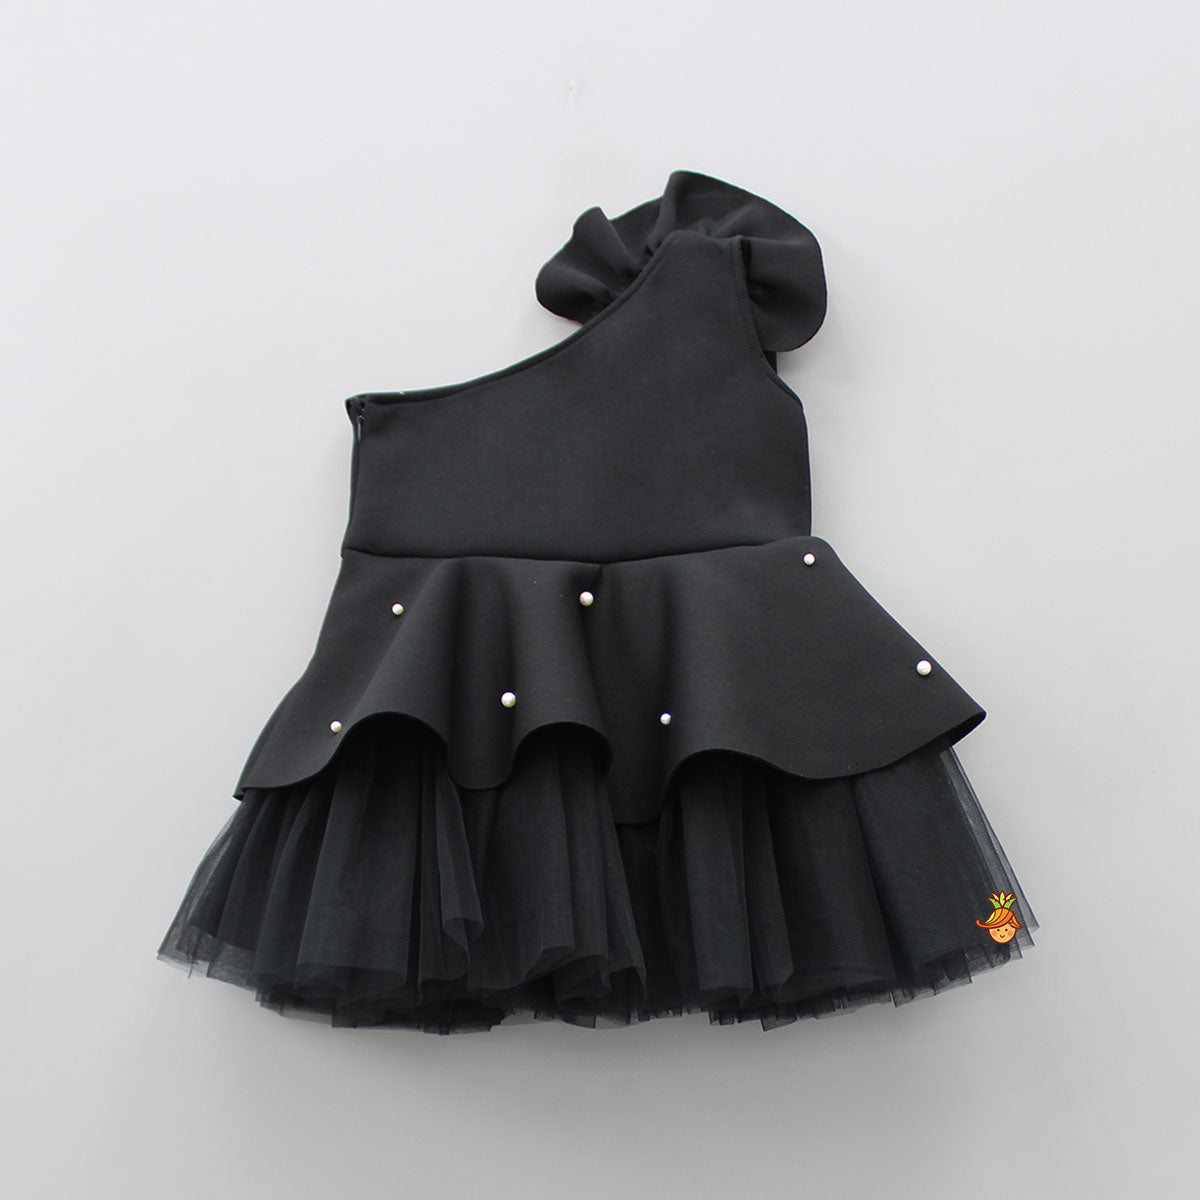 Exquisite Pearls And Rose Embellished Frilly Black Scuba Dress